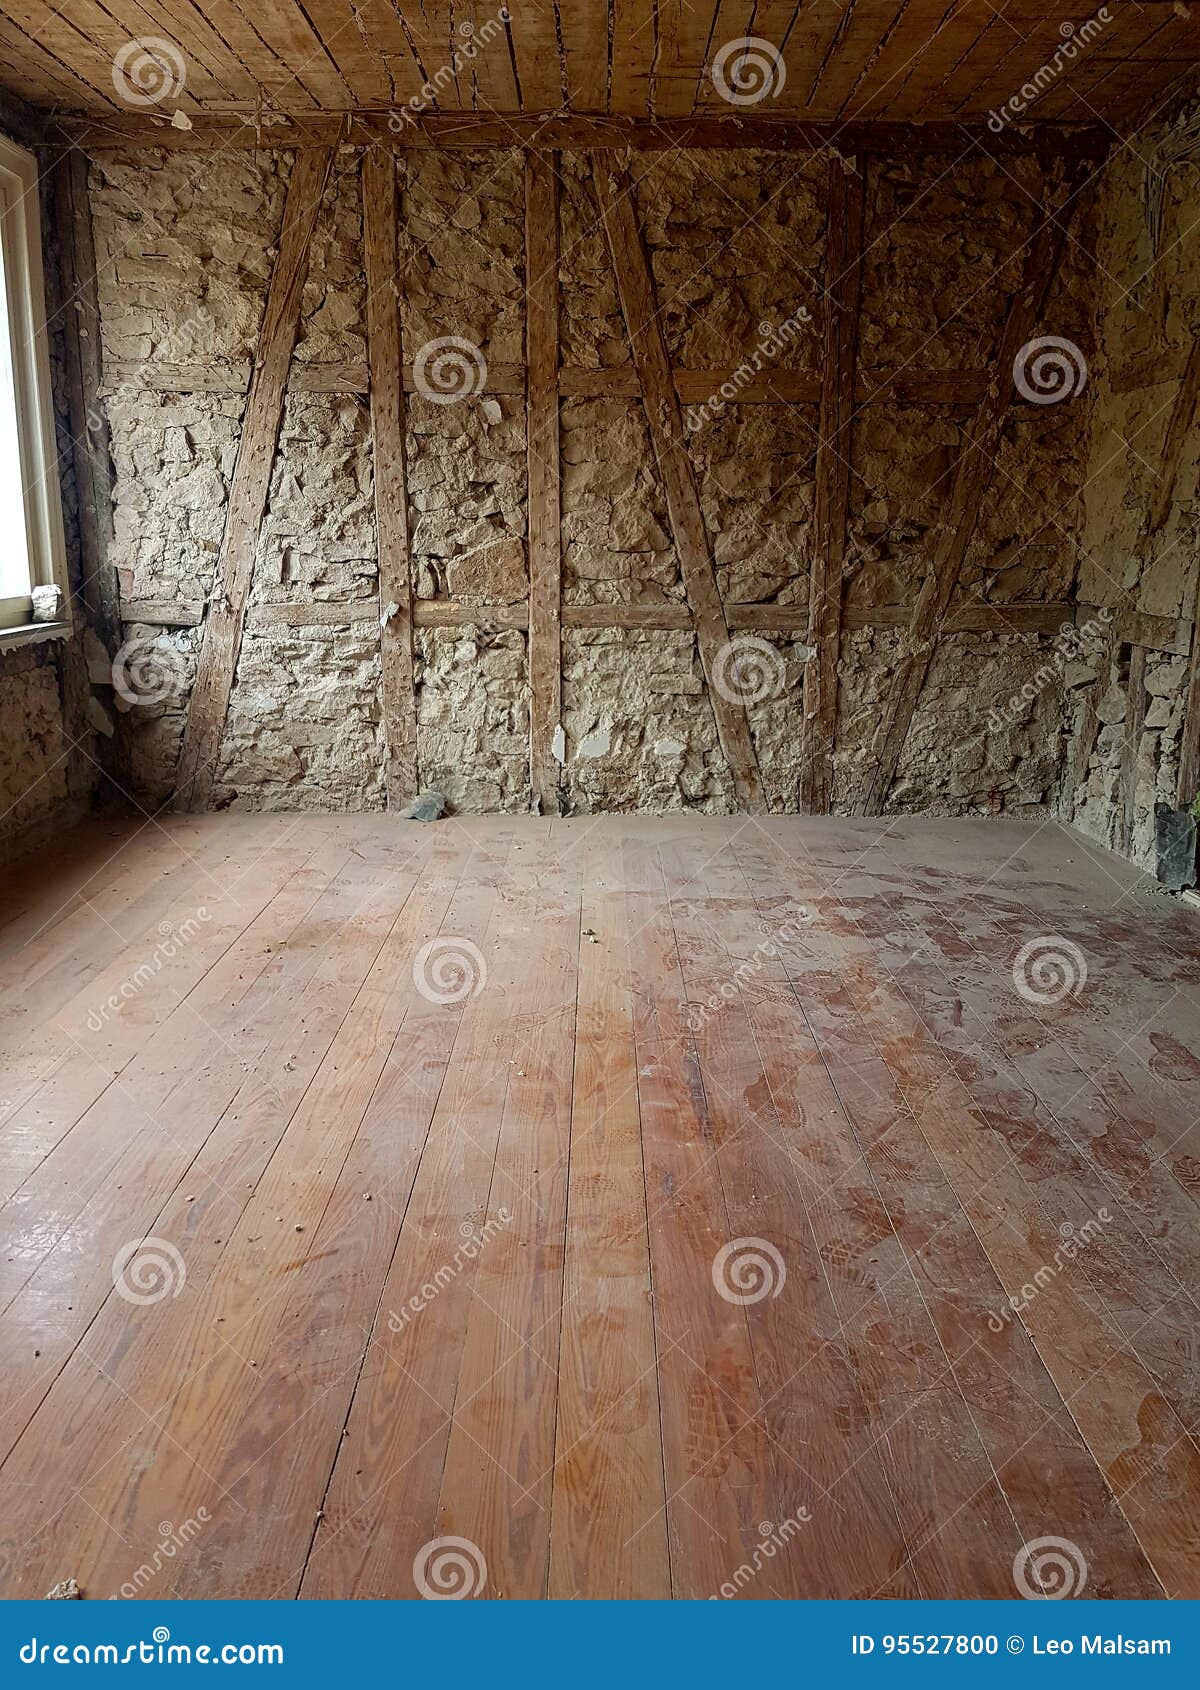 Old house stock photo. Image of abstract, light, detail - 95527800